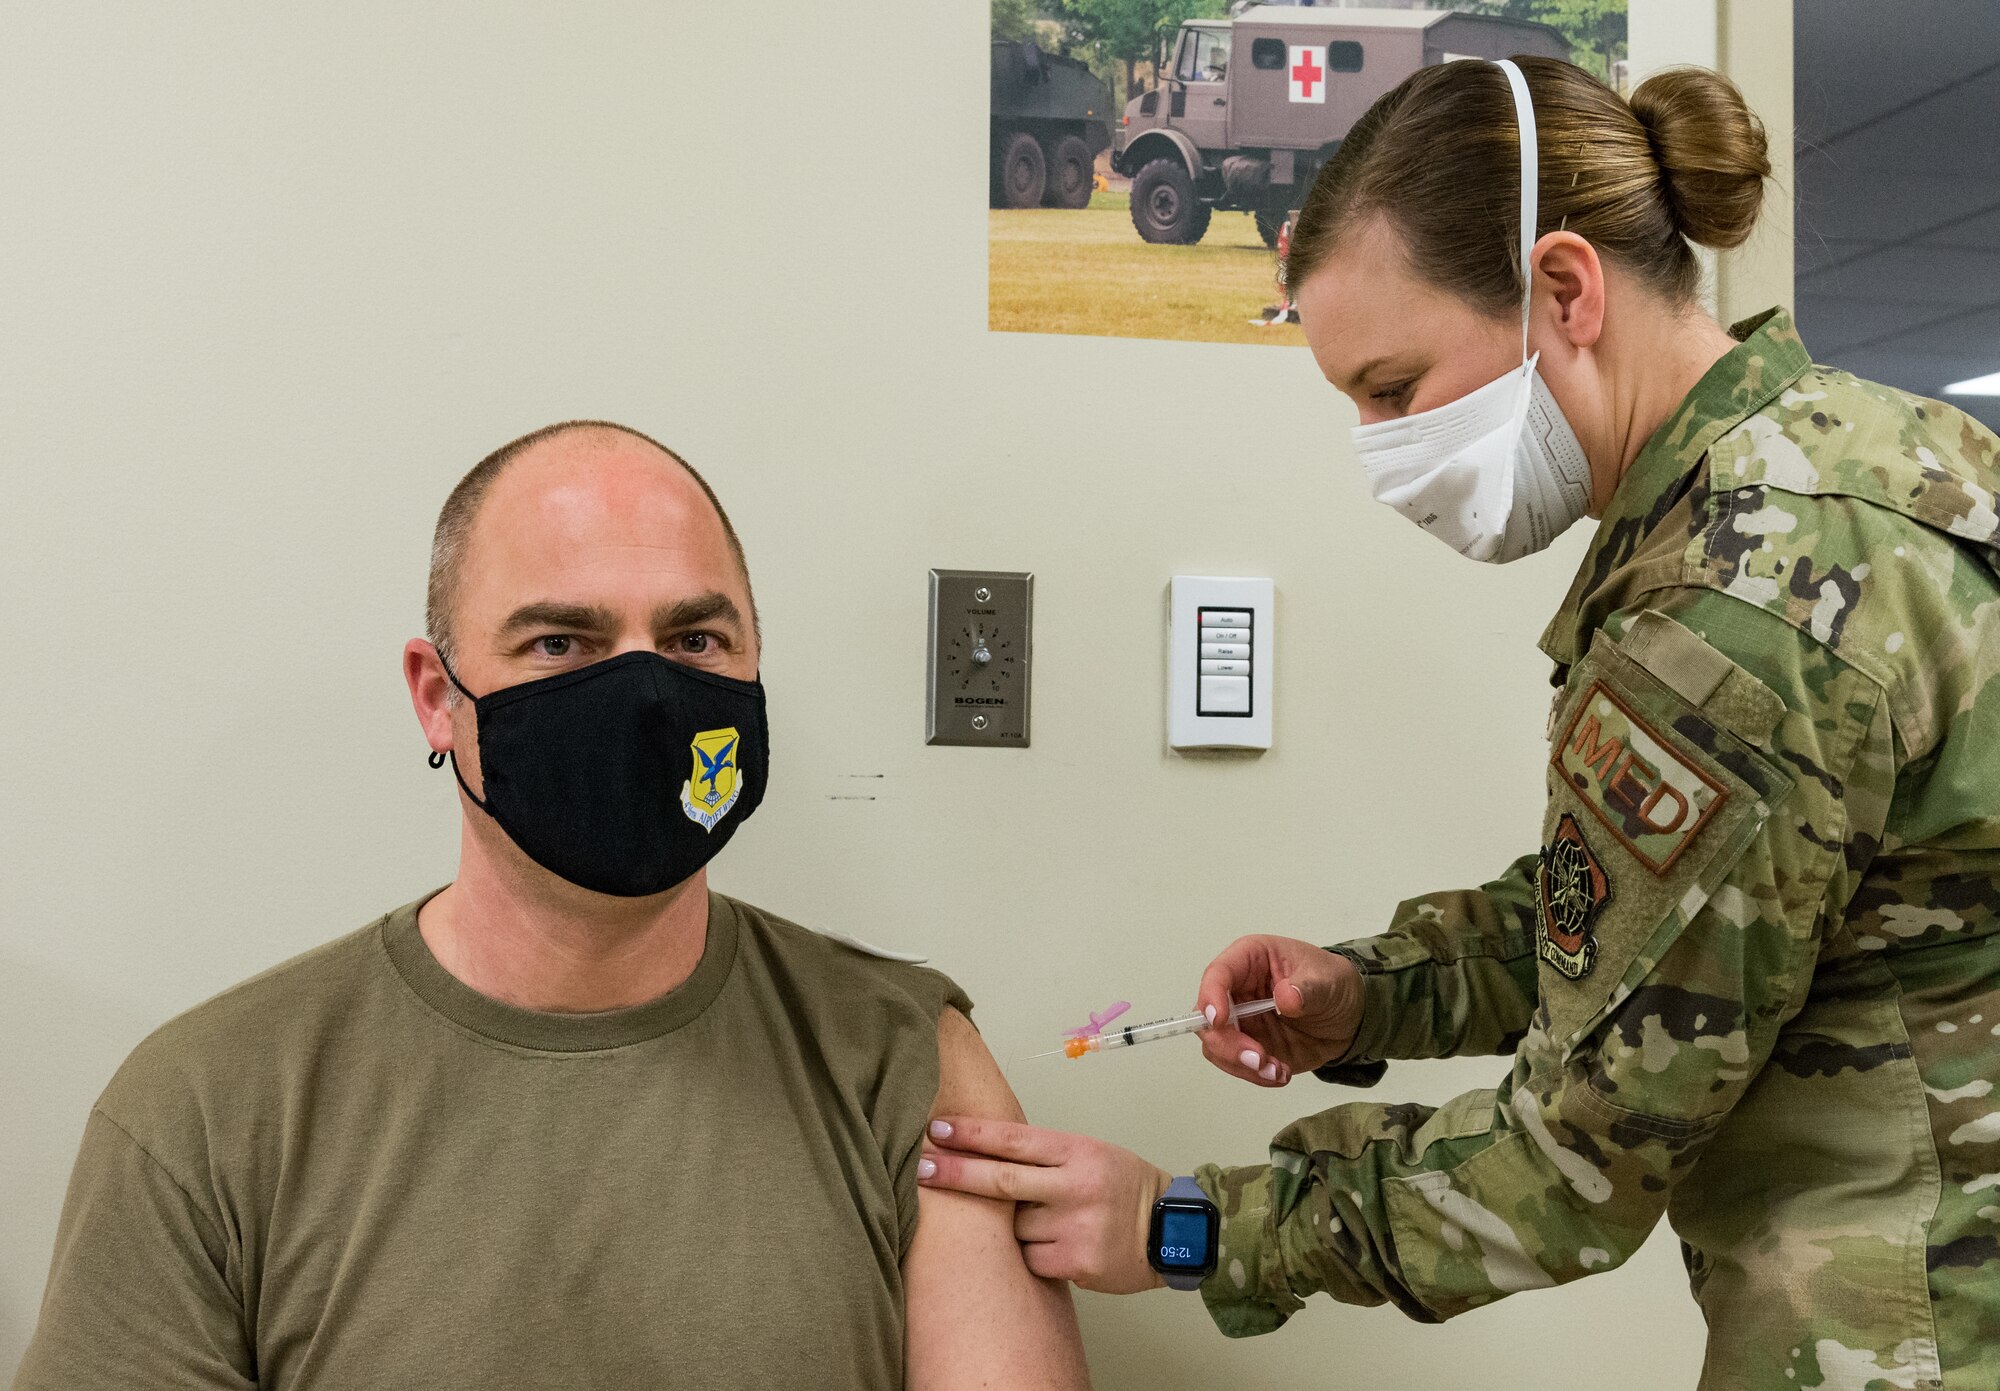 Chief Master Sgt. Jeremiah Grisham, 436th Airlift Wing interim command chief, receives the COVID-19 vaccine administered by Staff Sgt. Kelsey Loeser, 436th Medical Group unit training manager, Jan. 22, 2021, at Dover Air Force Base, Delaware. Grisham was among the first of Team Dover senior leaders who voluntarily received the vaccine in accordance with Department of Defense guidance. The vaccine was granted emergency use authorization by the U.S. Food and Drug Administration for use in prevention of COVID-19. (U.S. Air Force photo by Roland Balik)